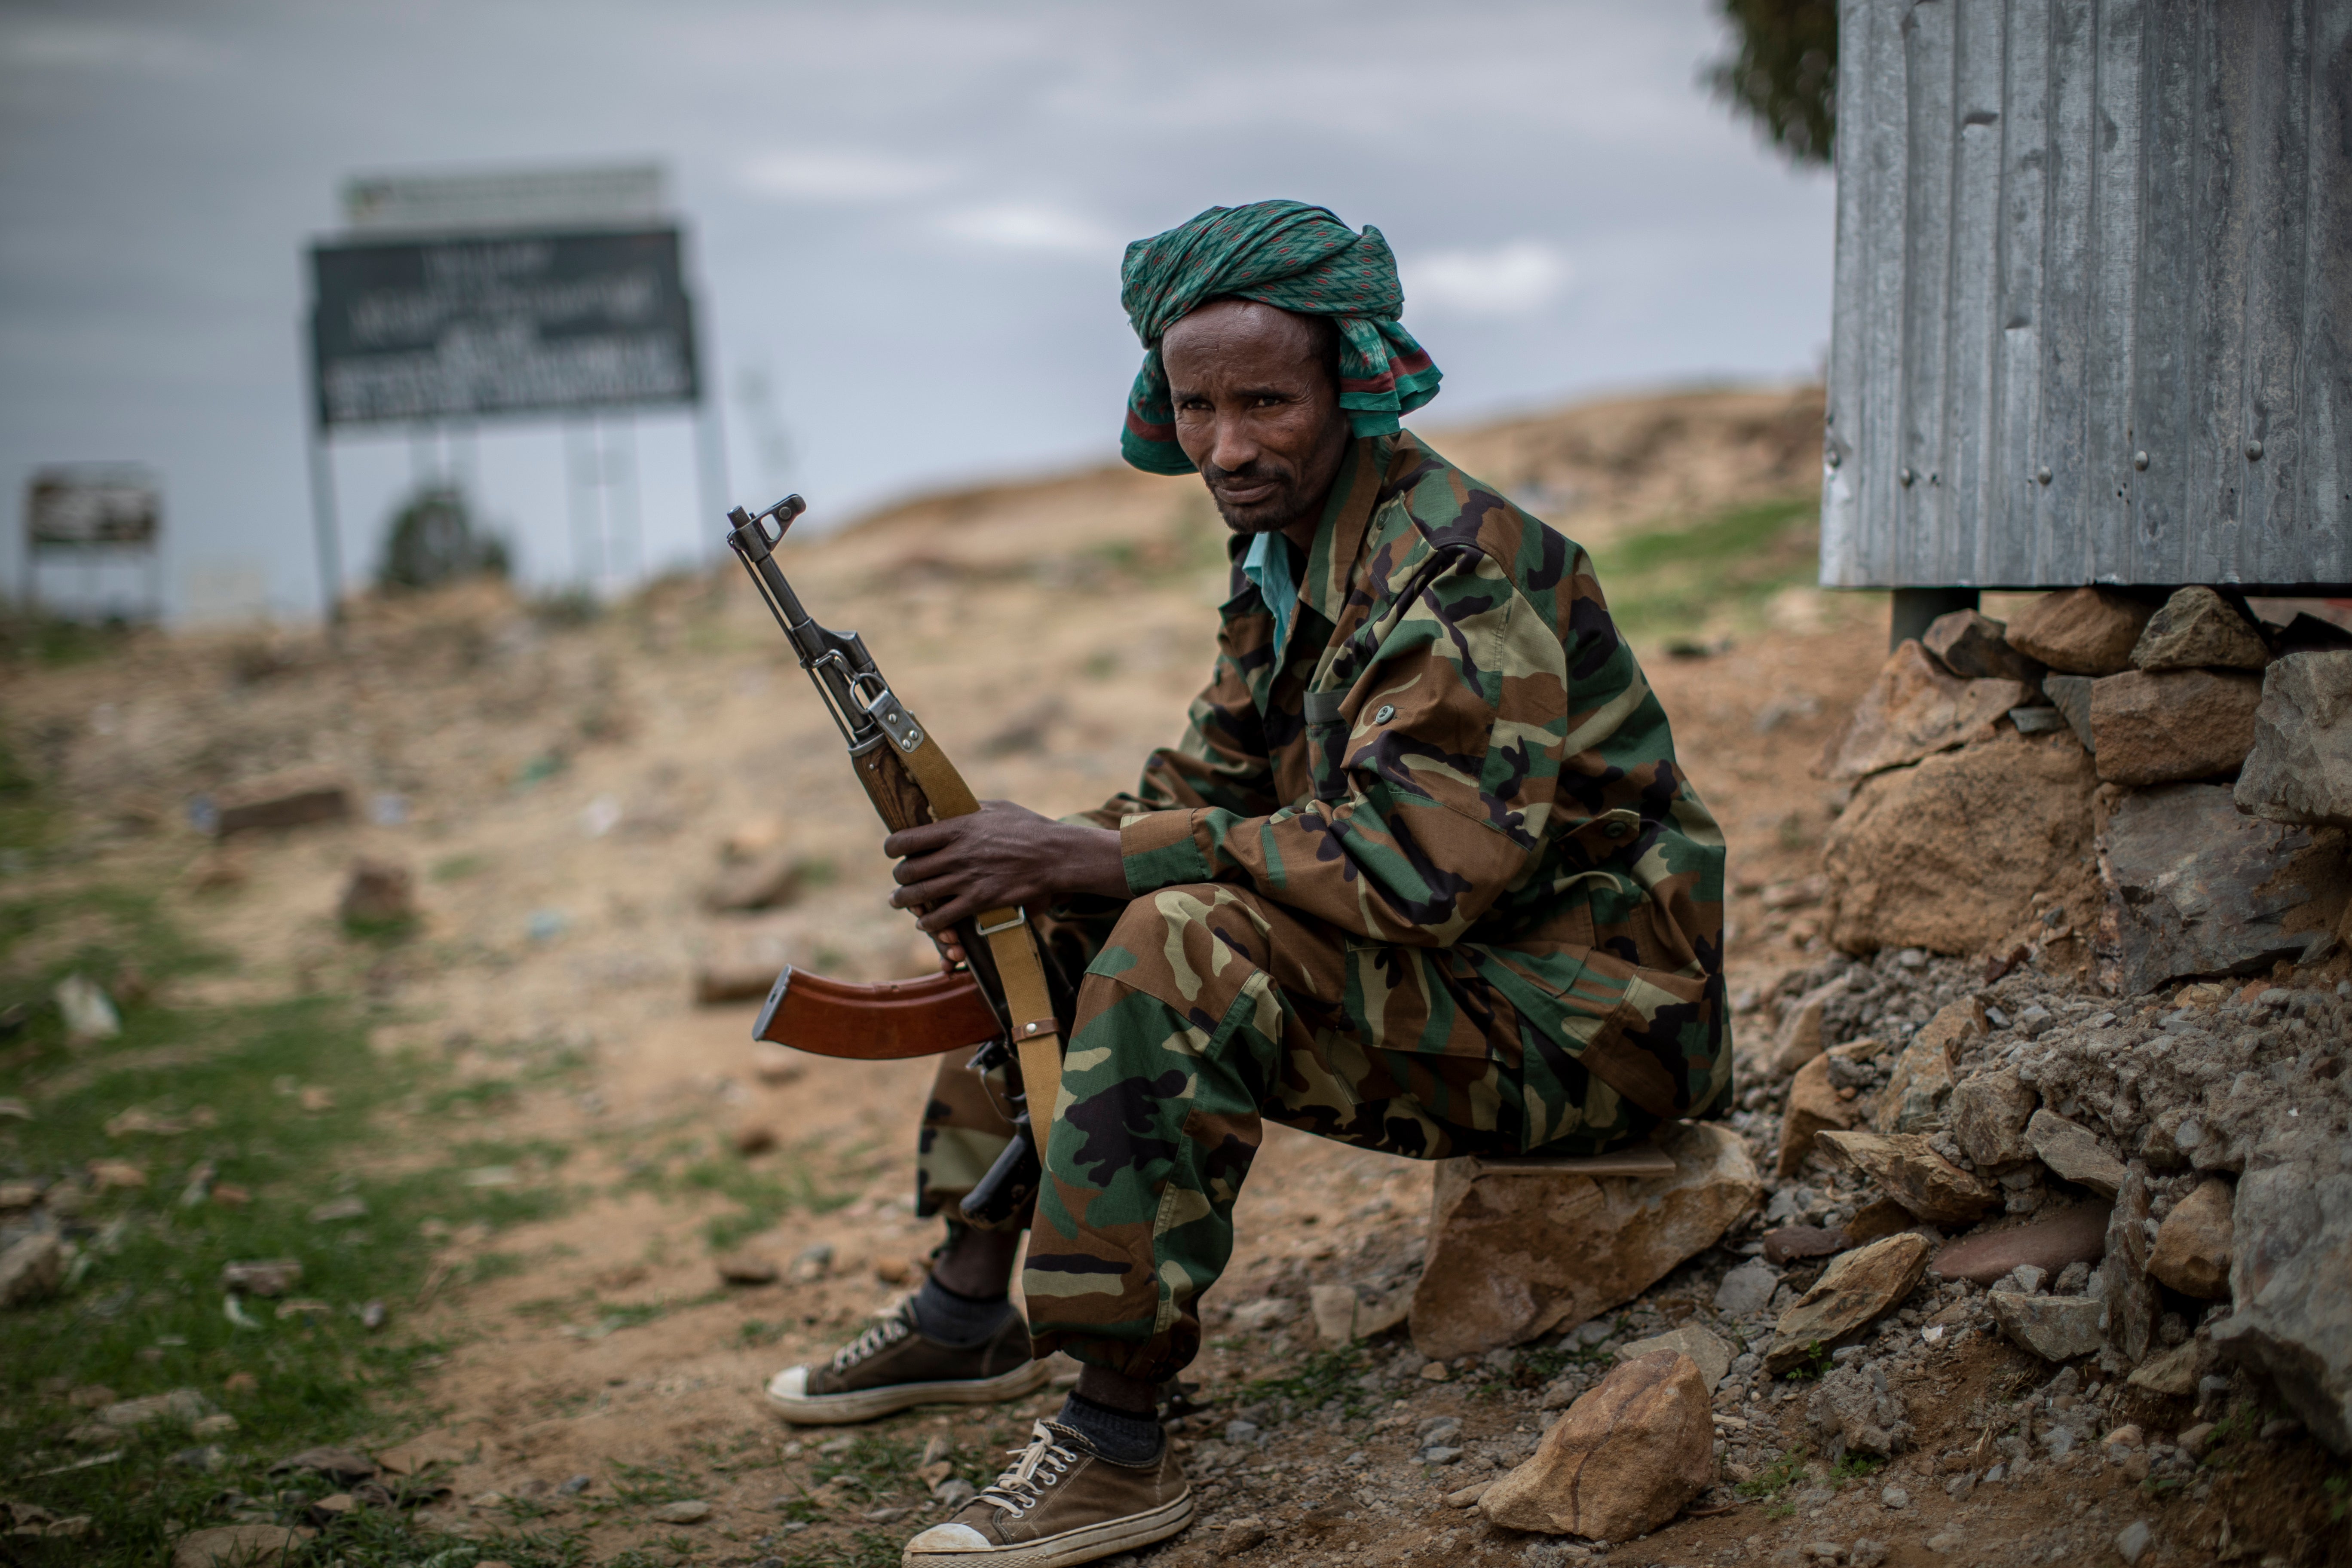 A fighter with the Tigray People’s Liberation Front (TPLF) pictured in the town of Hawzen in the Tigray region of northern Ethiopia on 7 May 2021